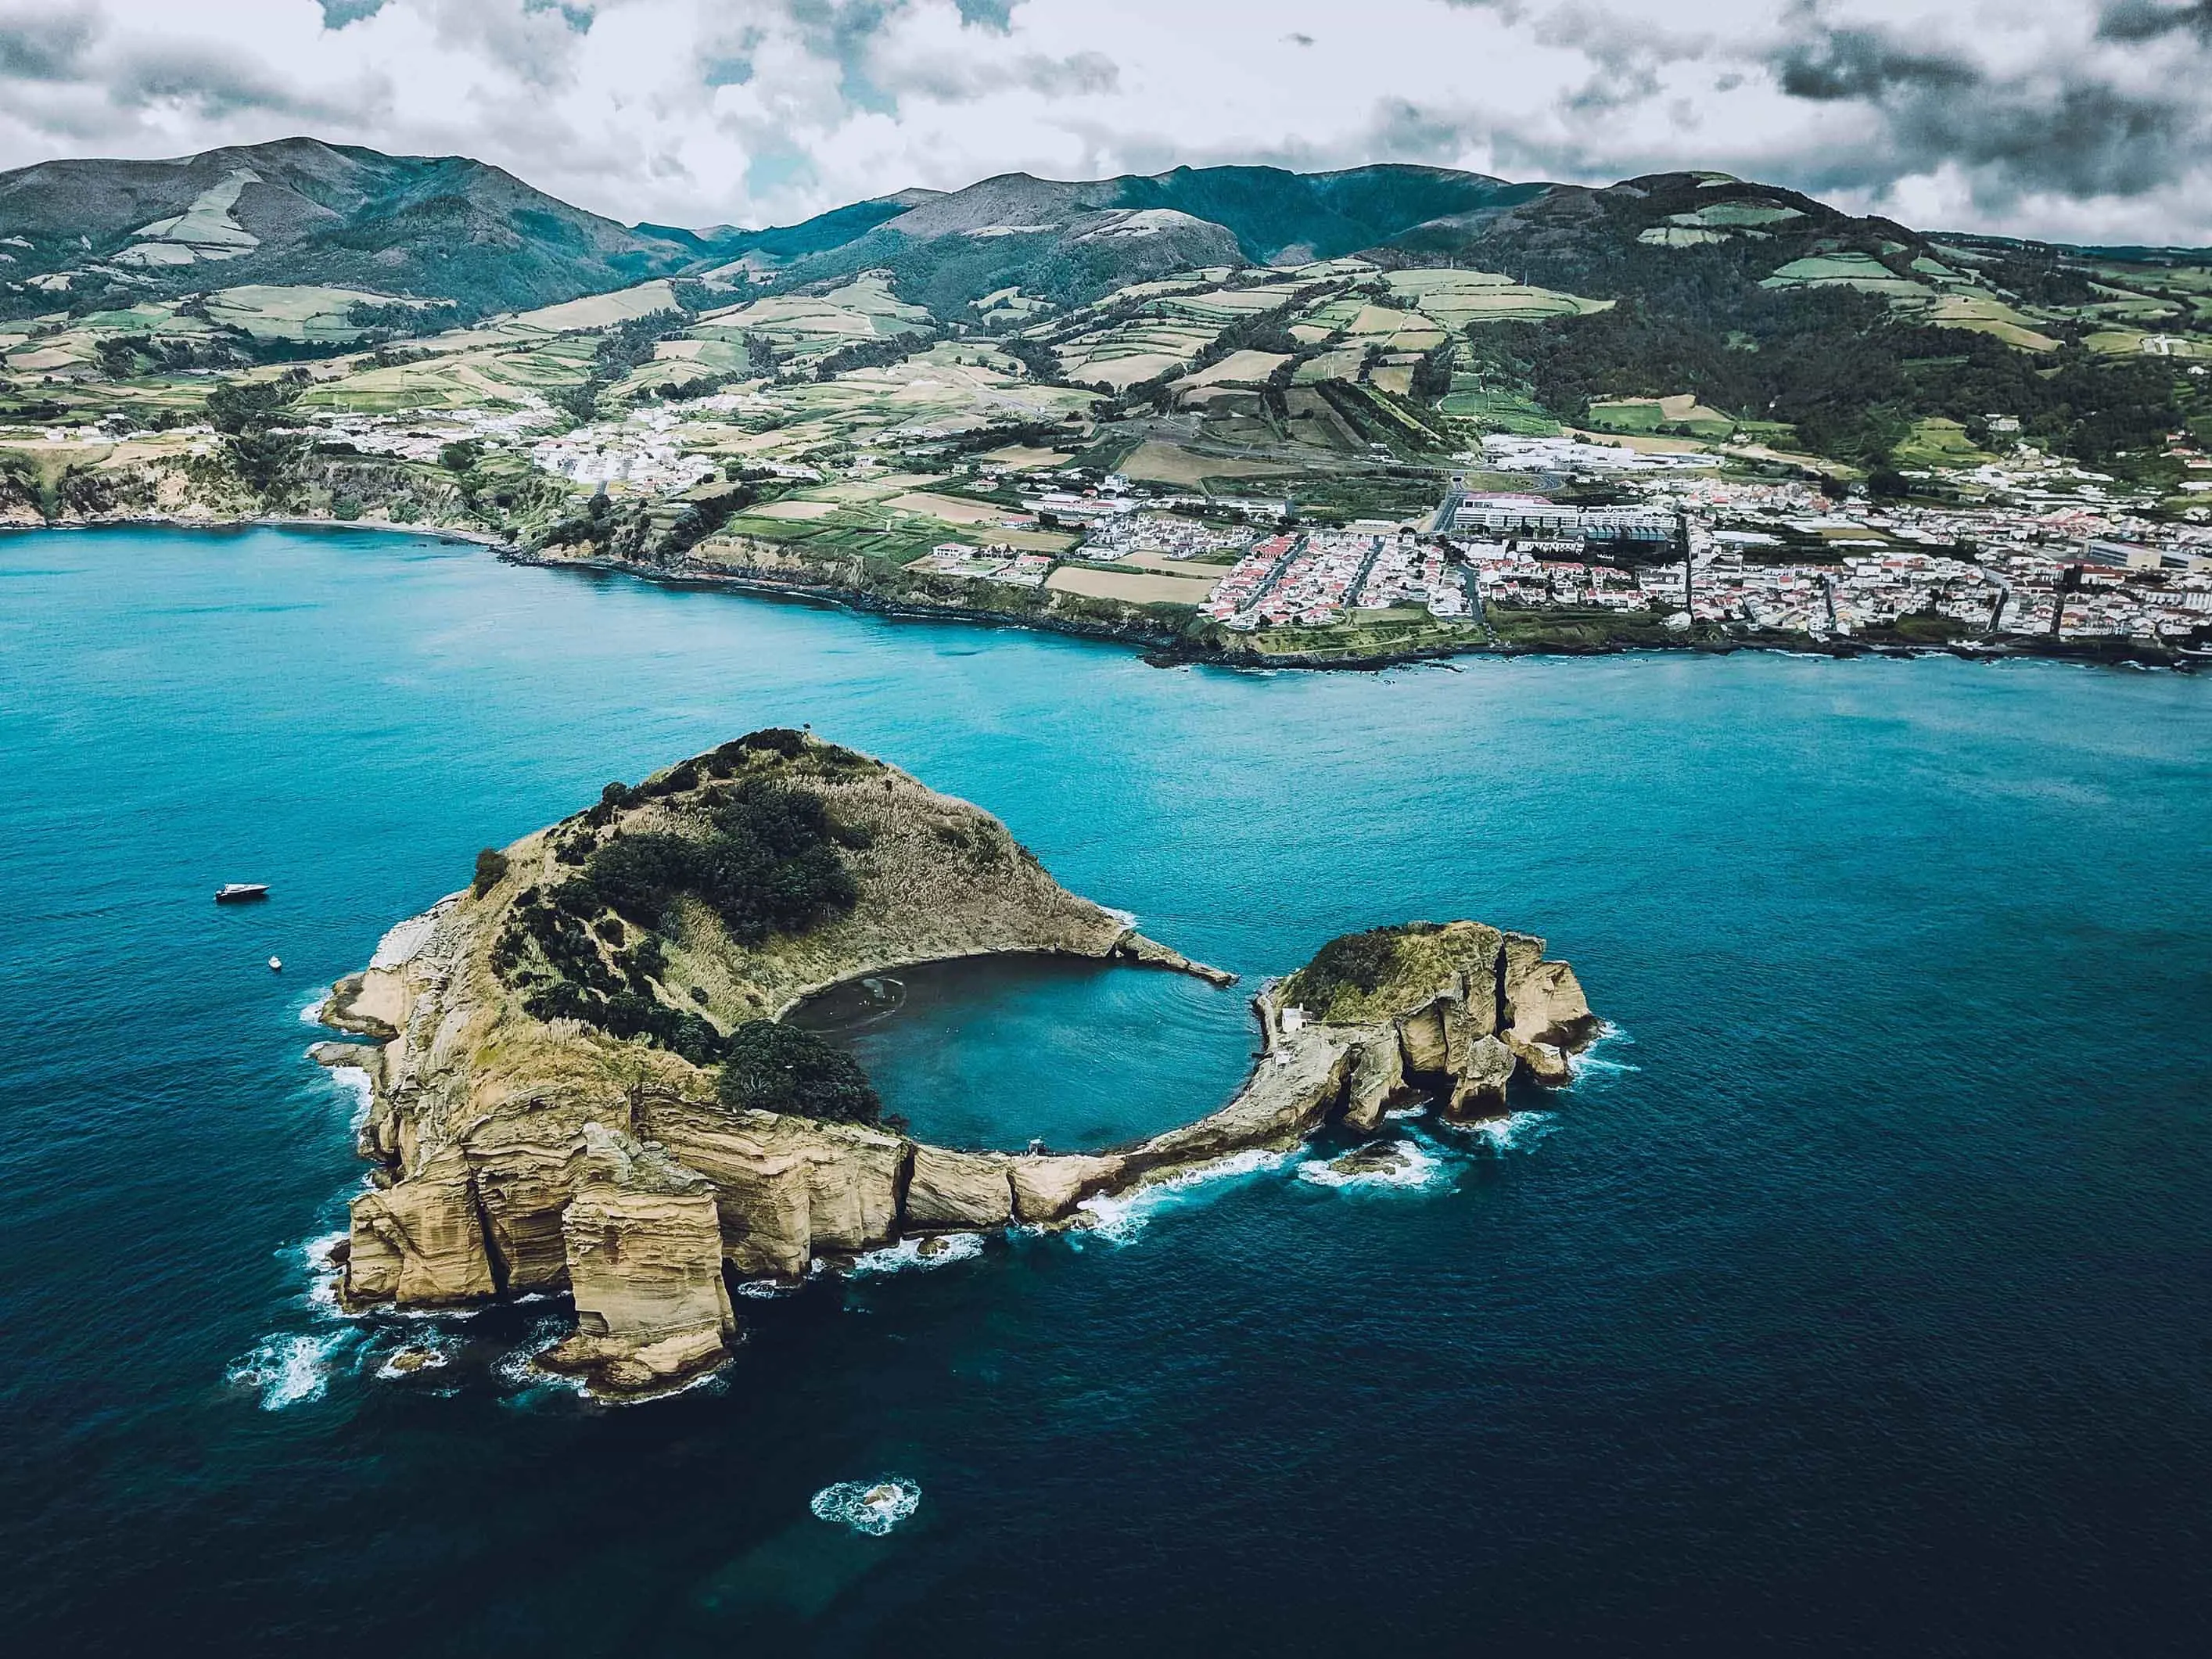 20 Unmissable Things To Do On São Miguel Island, Azores - Sao Miguel Snorkel Island 